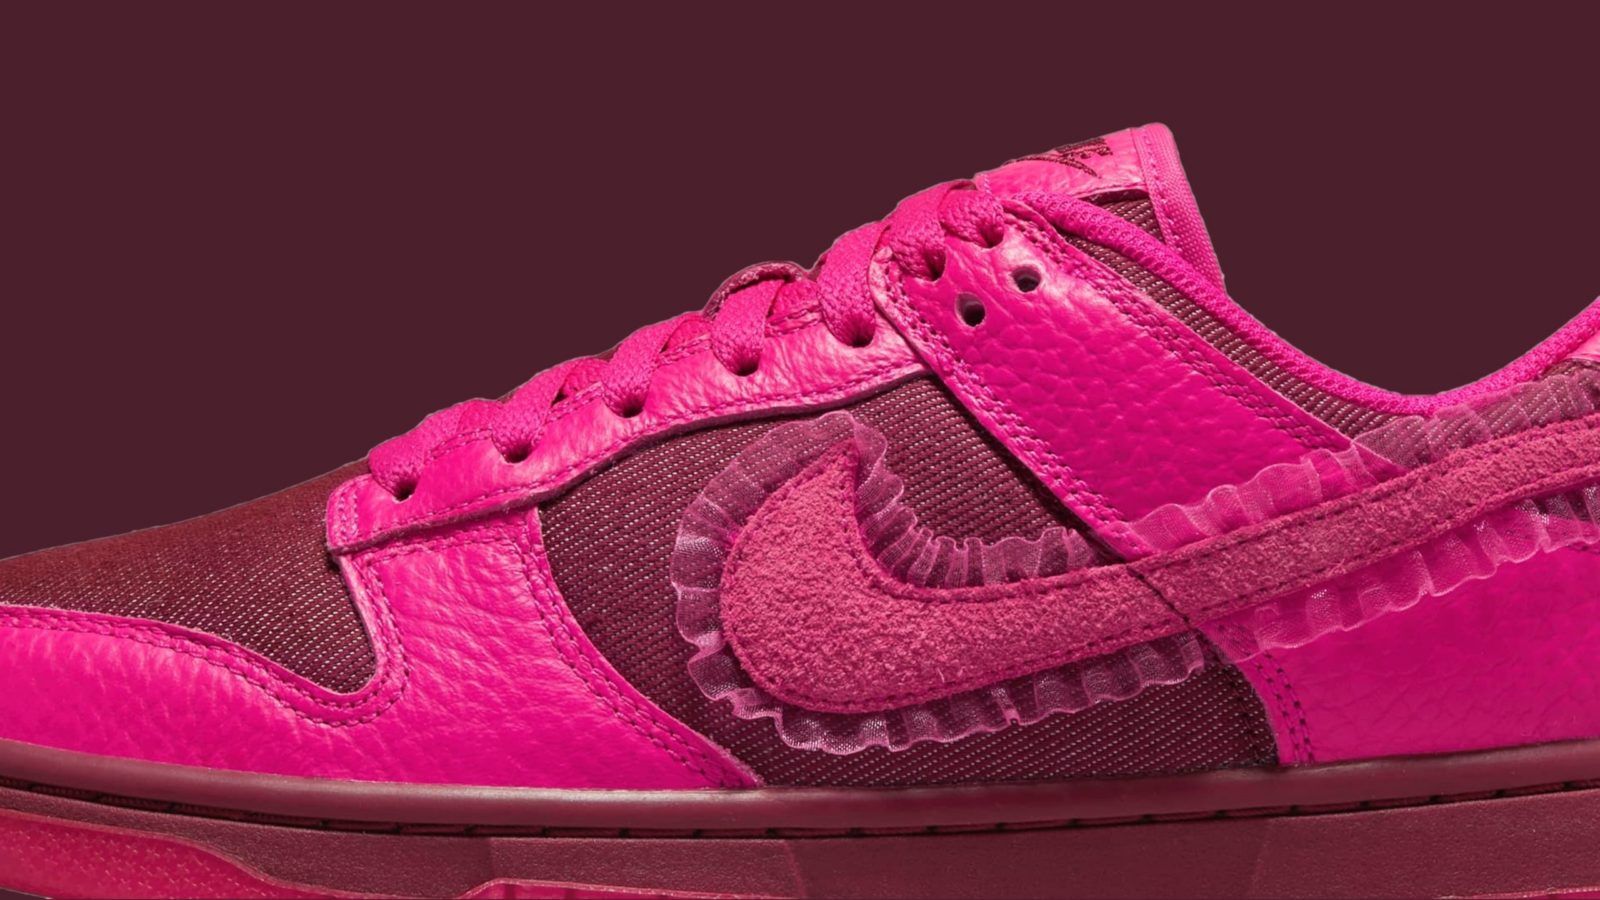 Valentine’s Day gift guide: 6 love-themed sneakers to gift your sole mates